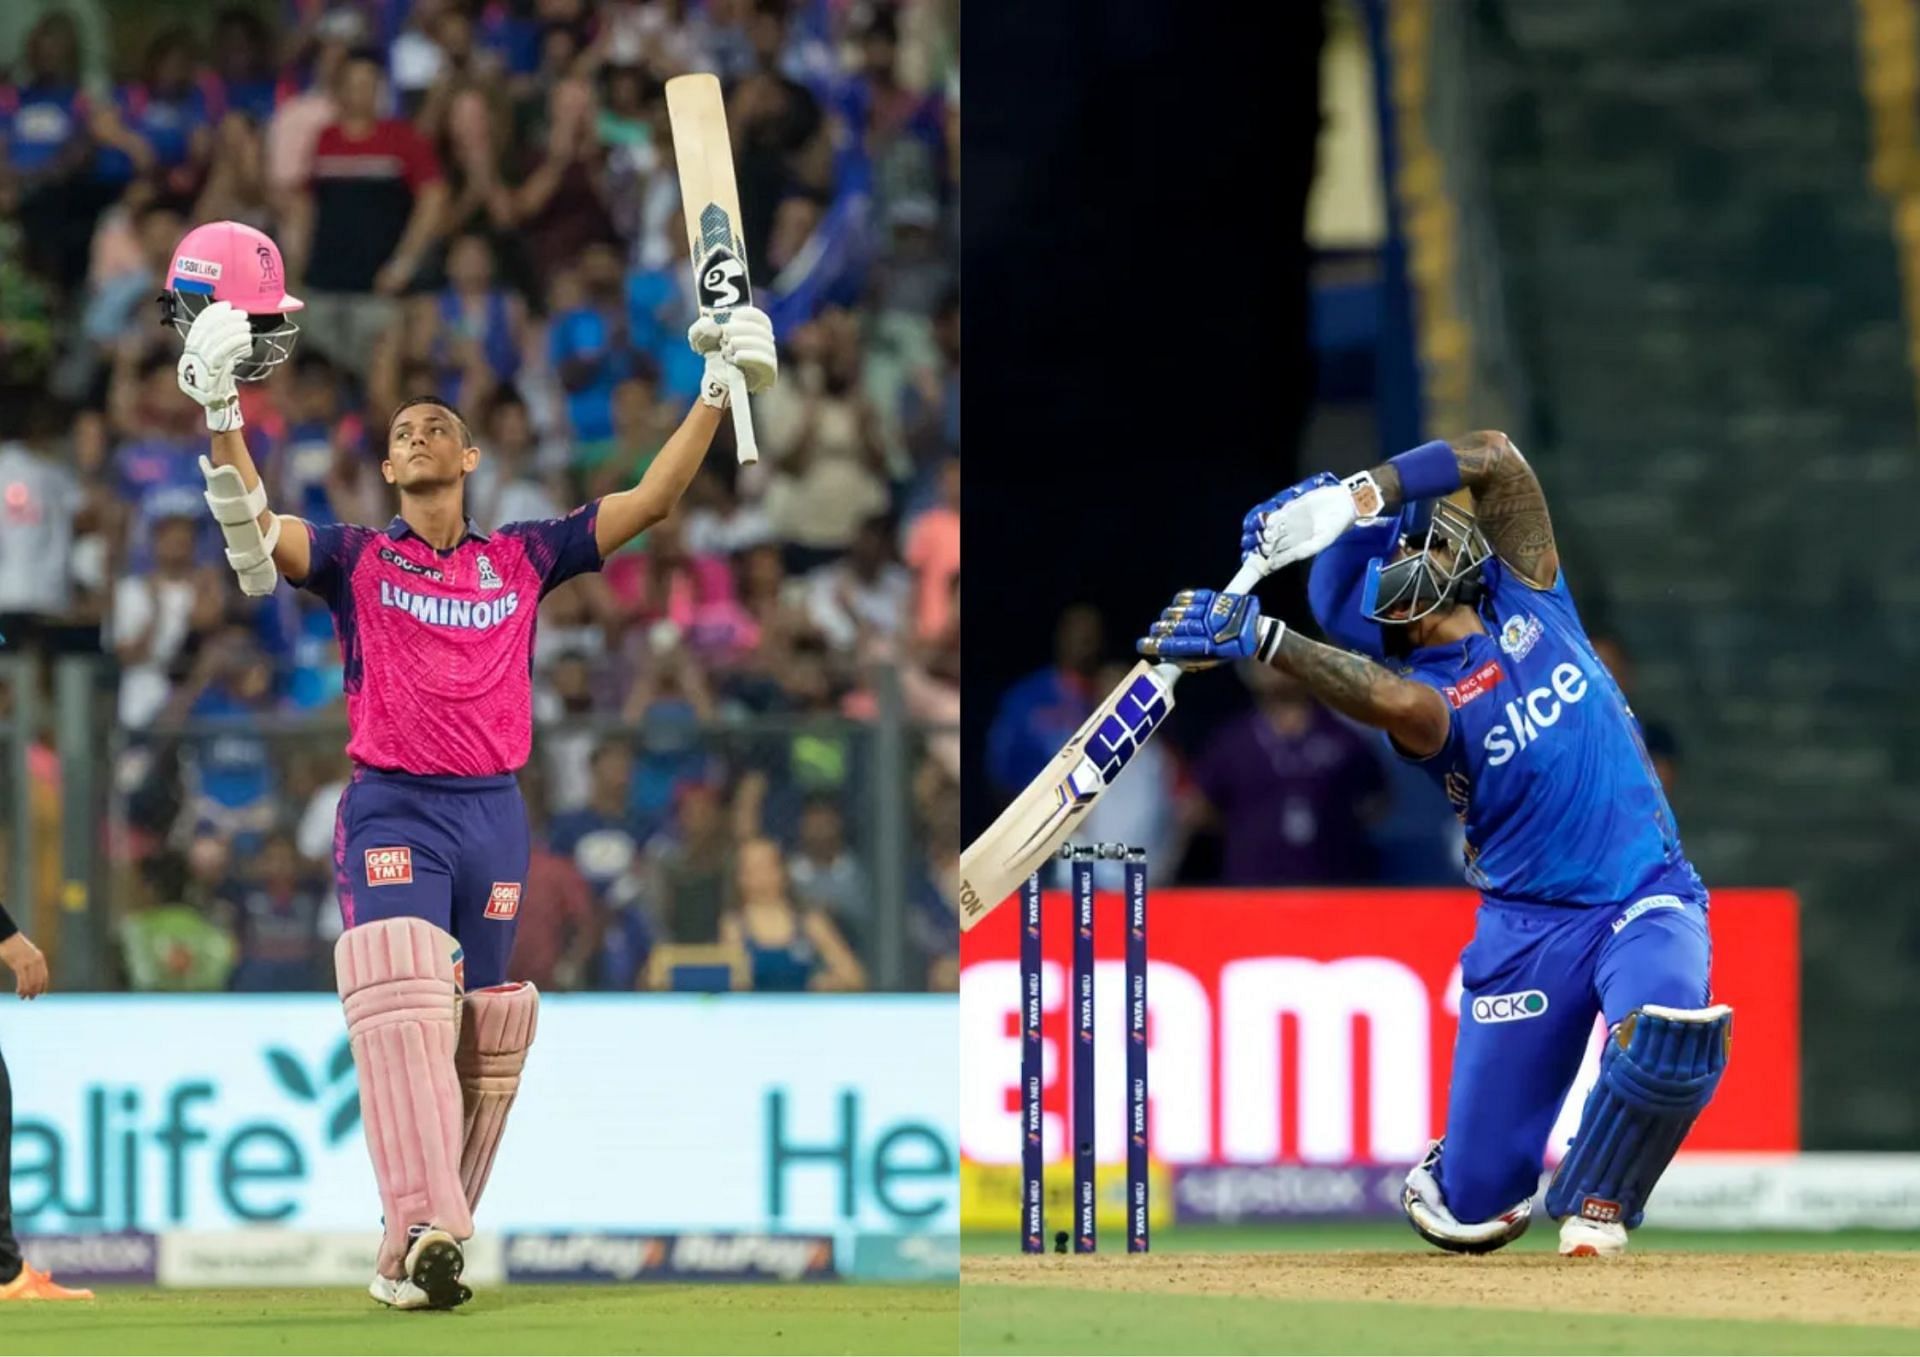 Yashasvi Jaiswal and Suryakumar Yadav lit up the week gone by in IPL 2023 (Picture credits: BCCI).